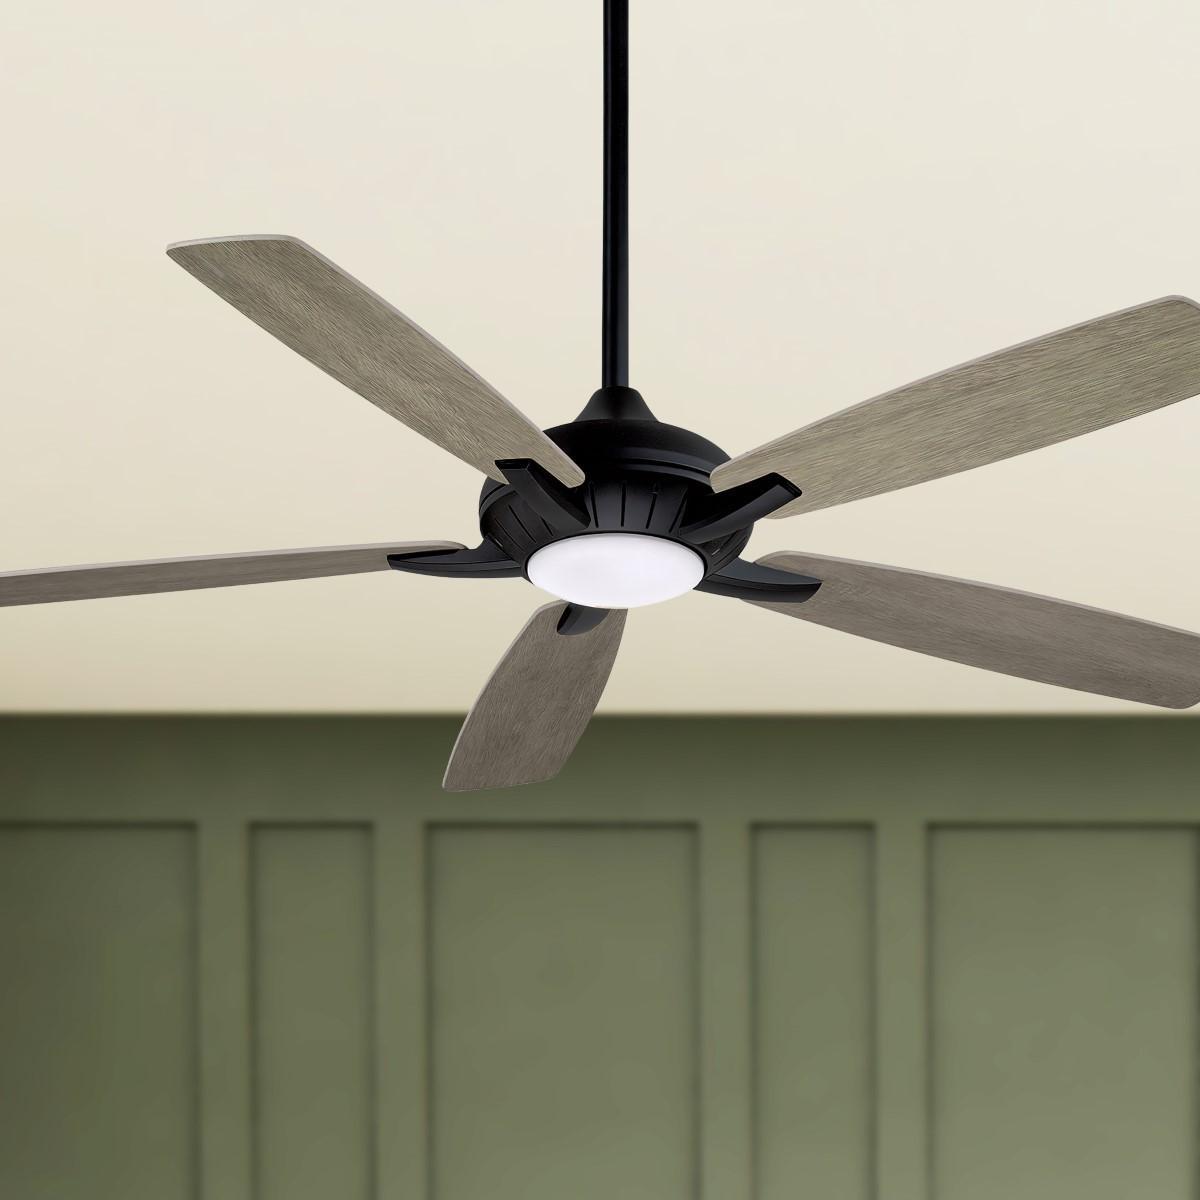 Dyno XL 60 Inch Smart Ceiling Fan With Light And Remote